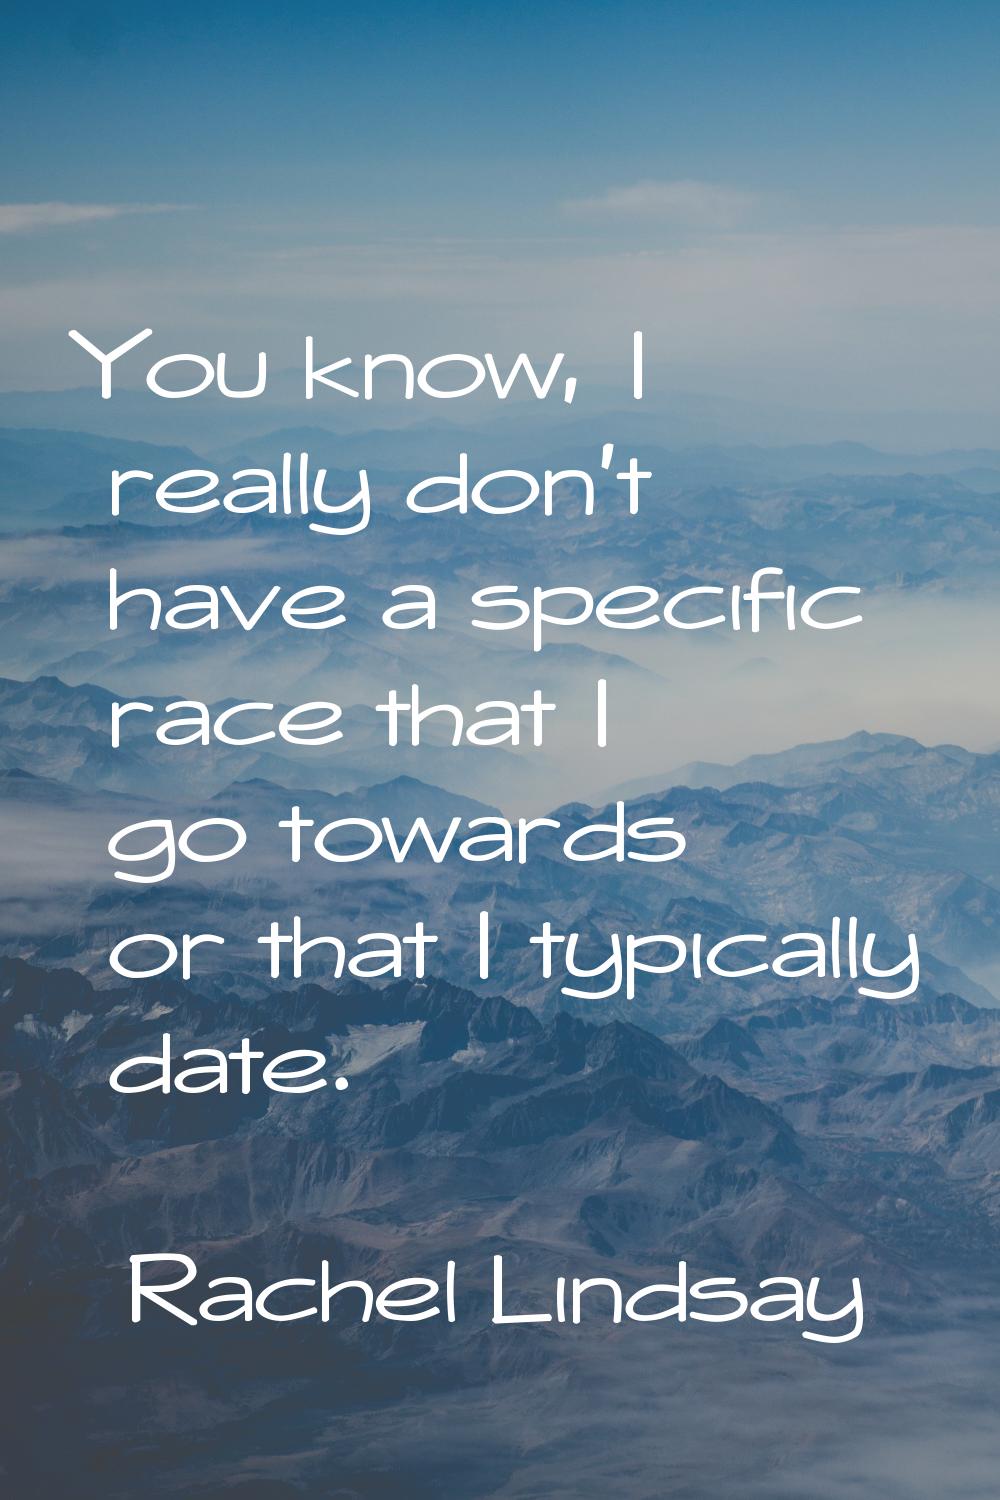 You know, I really don't have a specific race that I go towards or that I typically date.